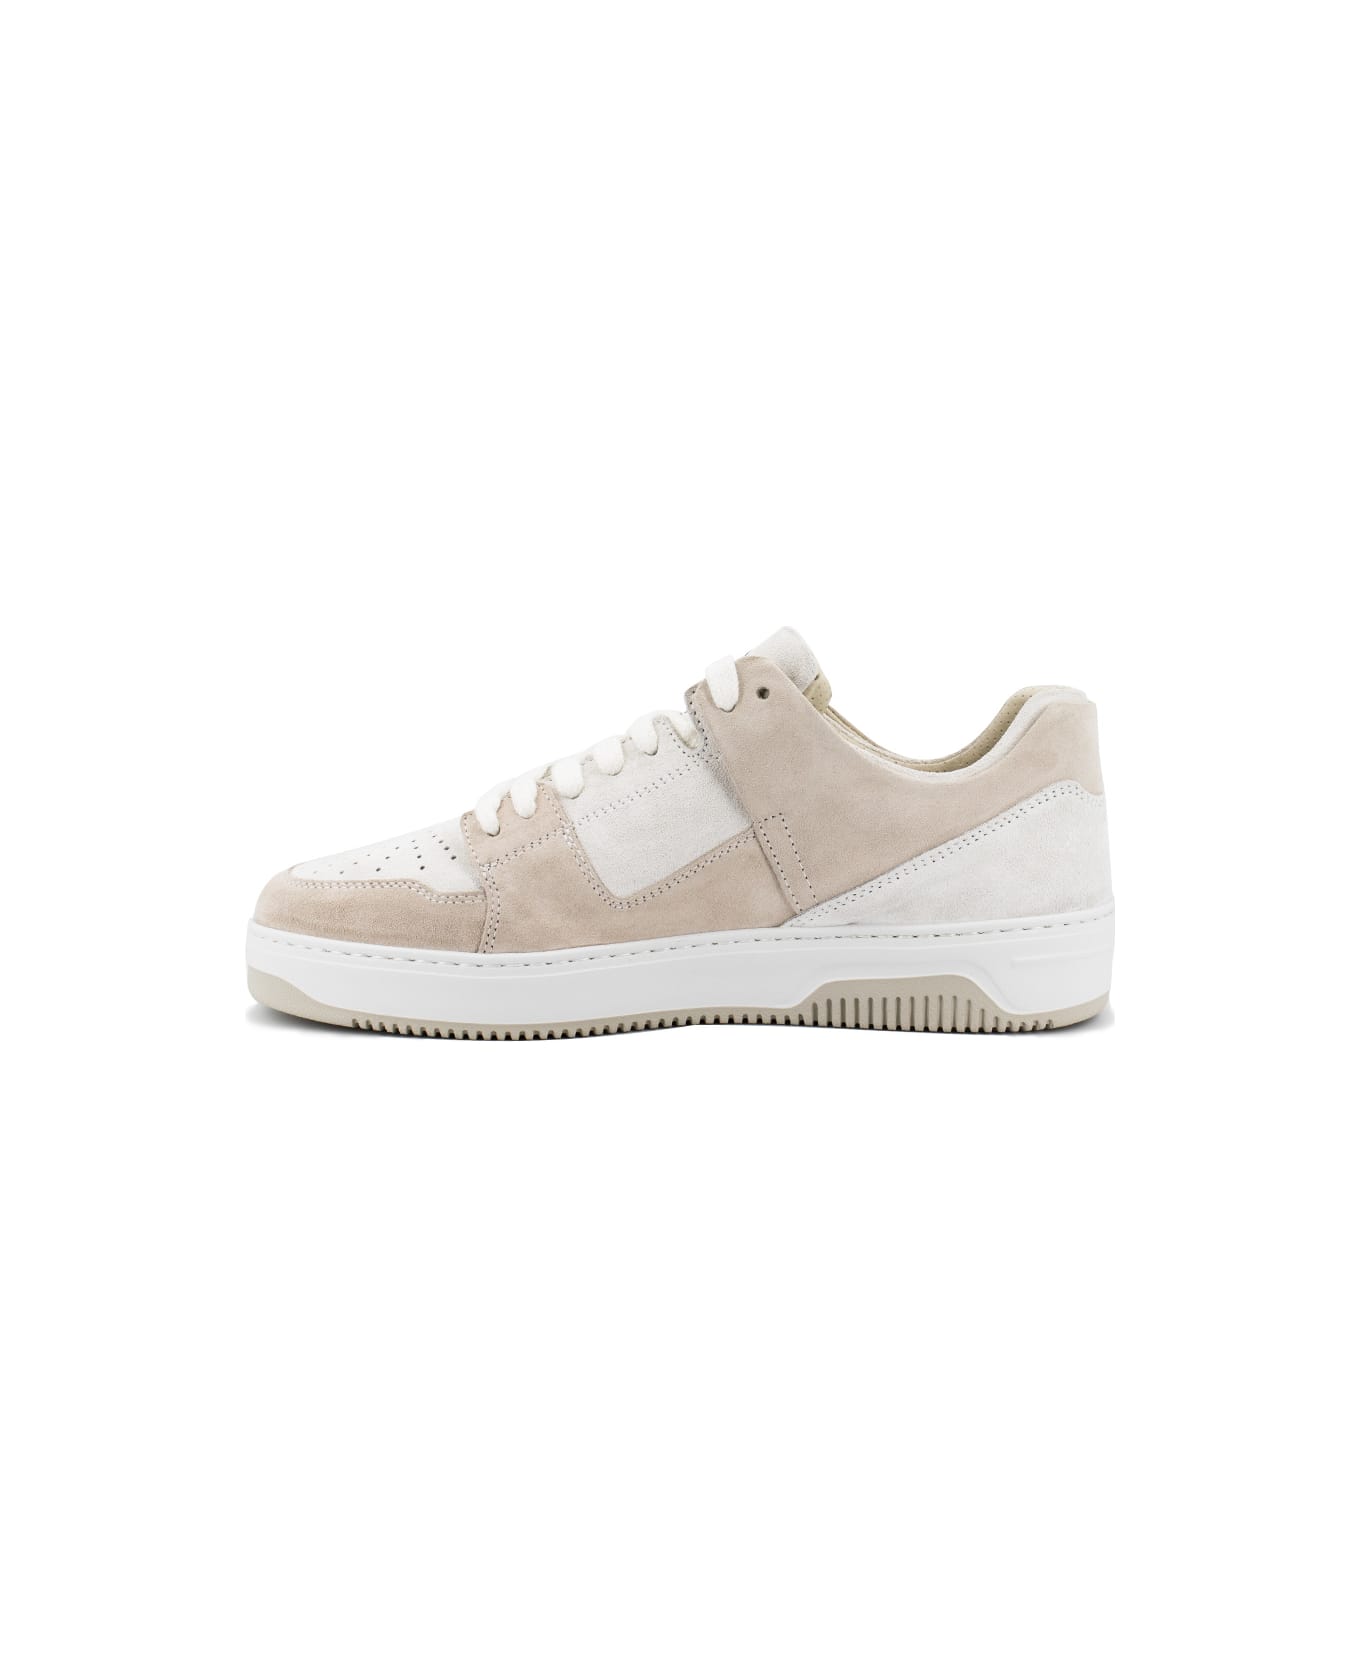 Eleventy Sneakers - SAND AND WHITE